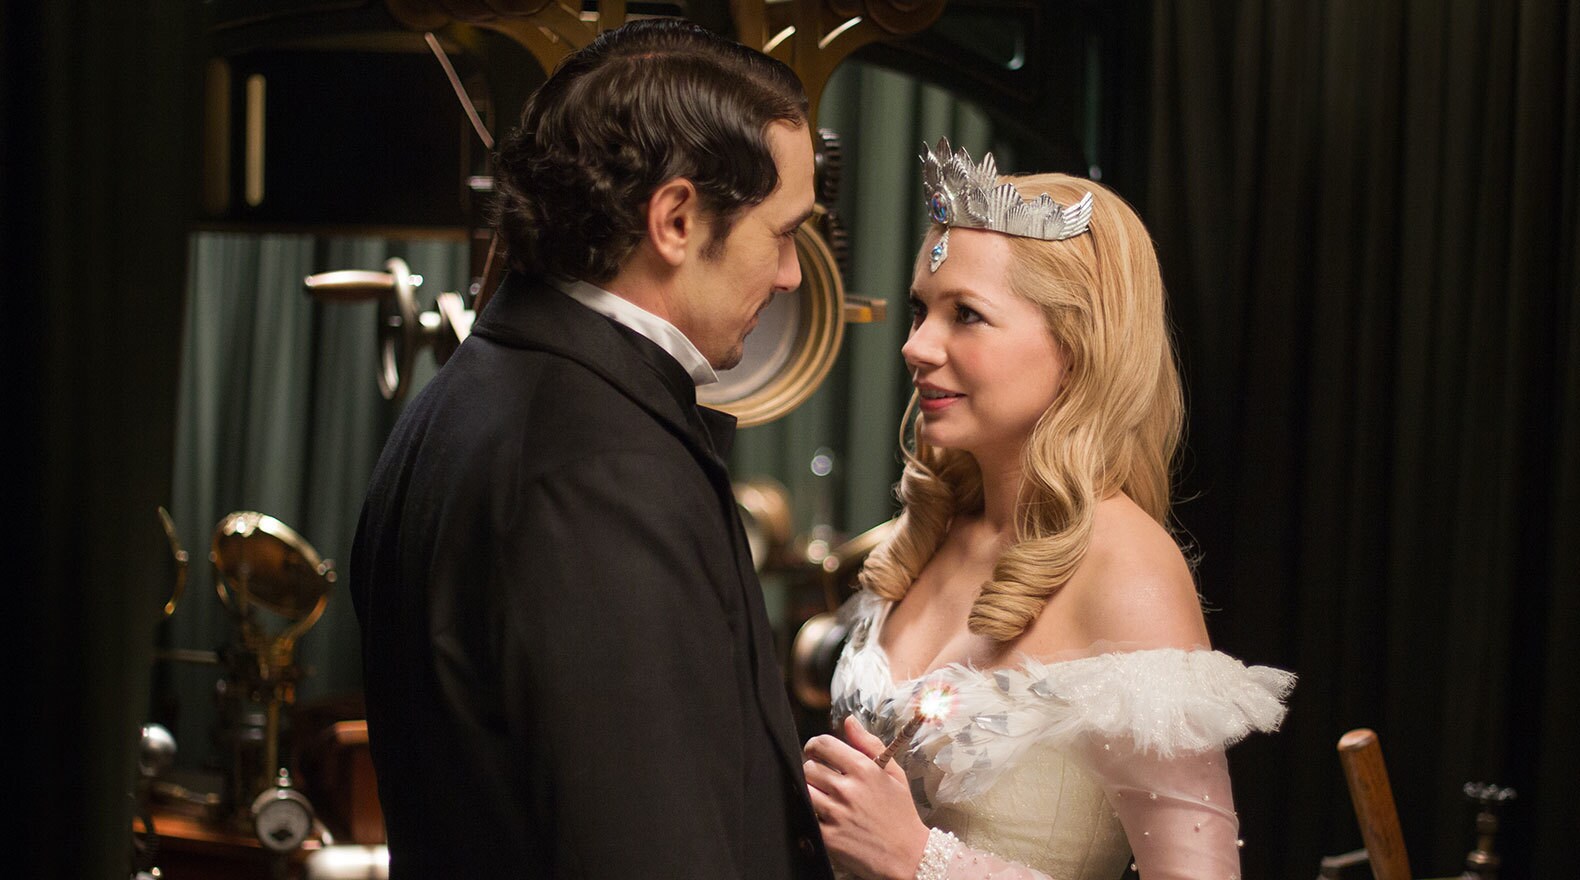 James Franco and Michelle Williams in "Oz the Great and Powerful"